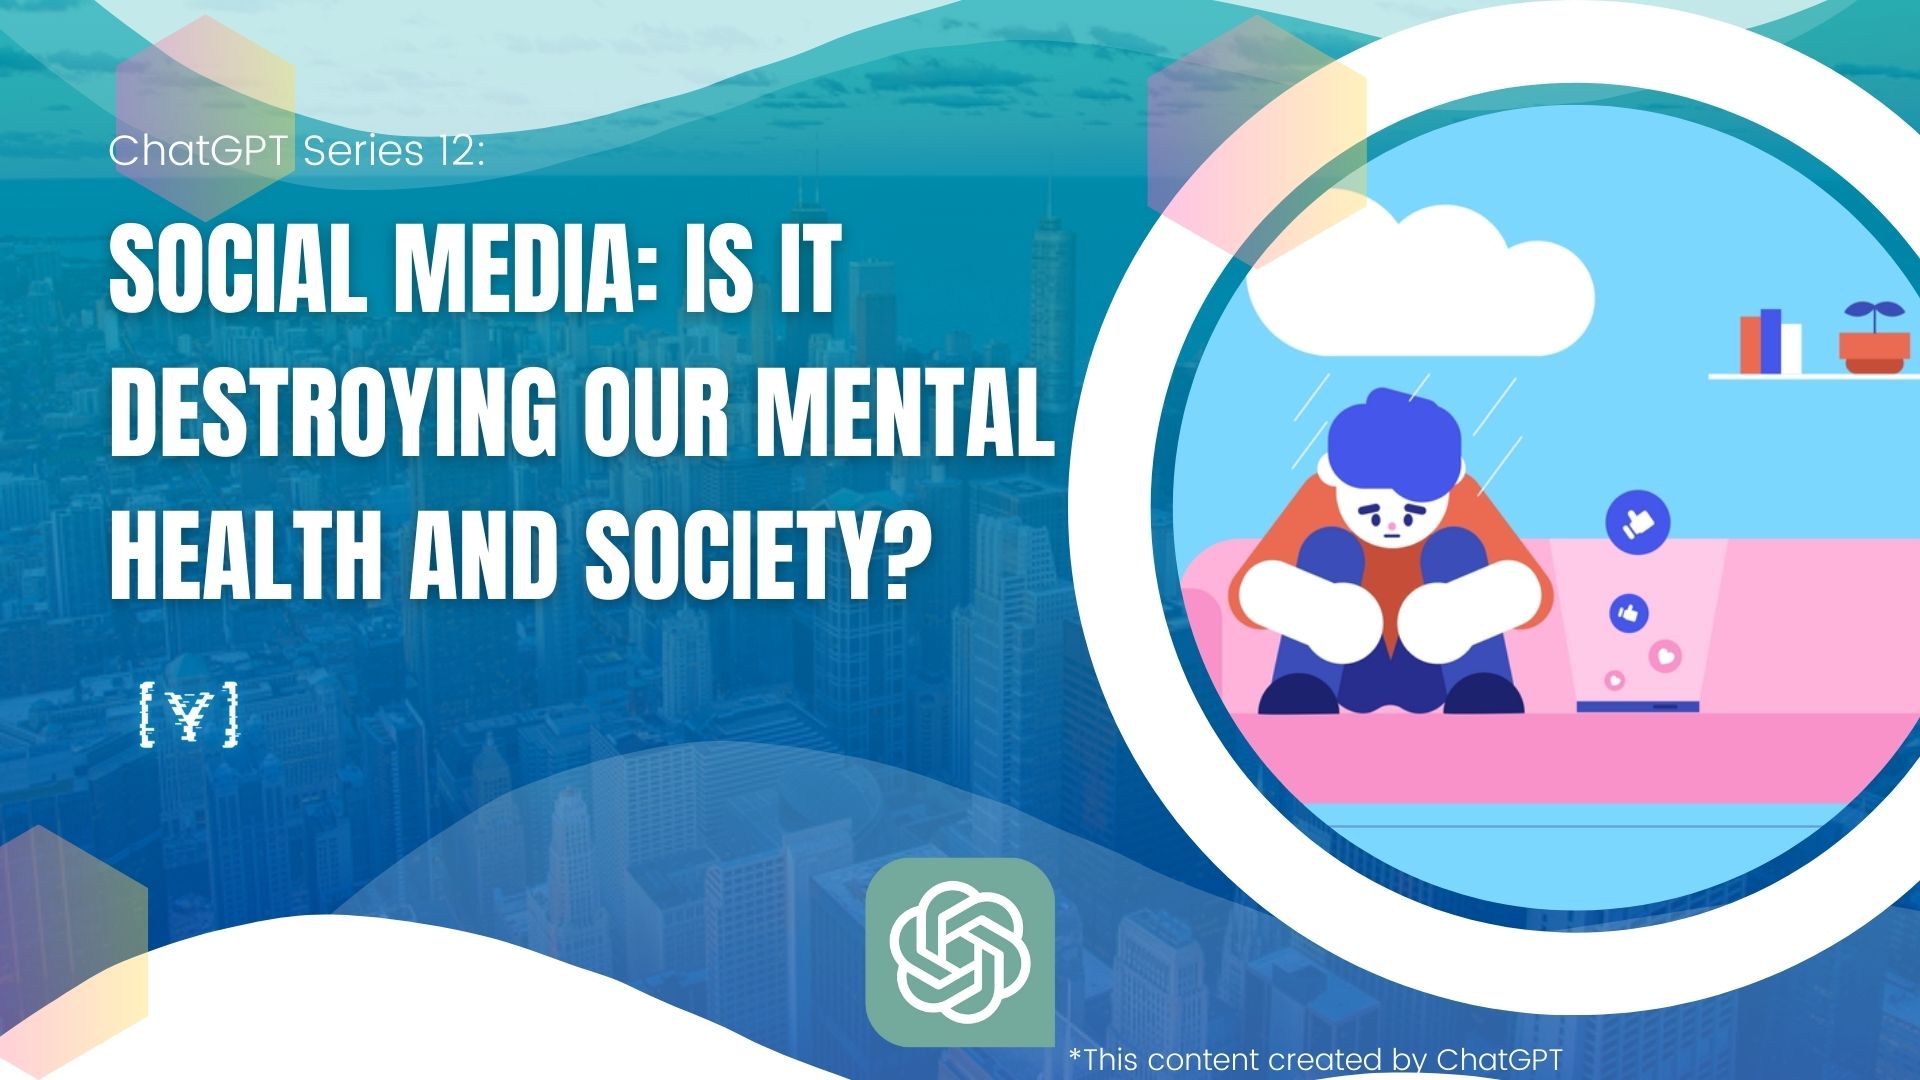 Social Media: Is It Destroying Our Mental Health and Society?